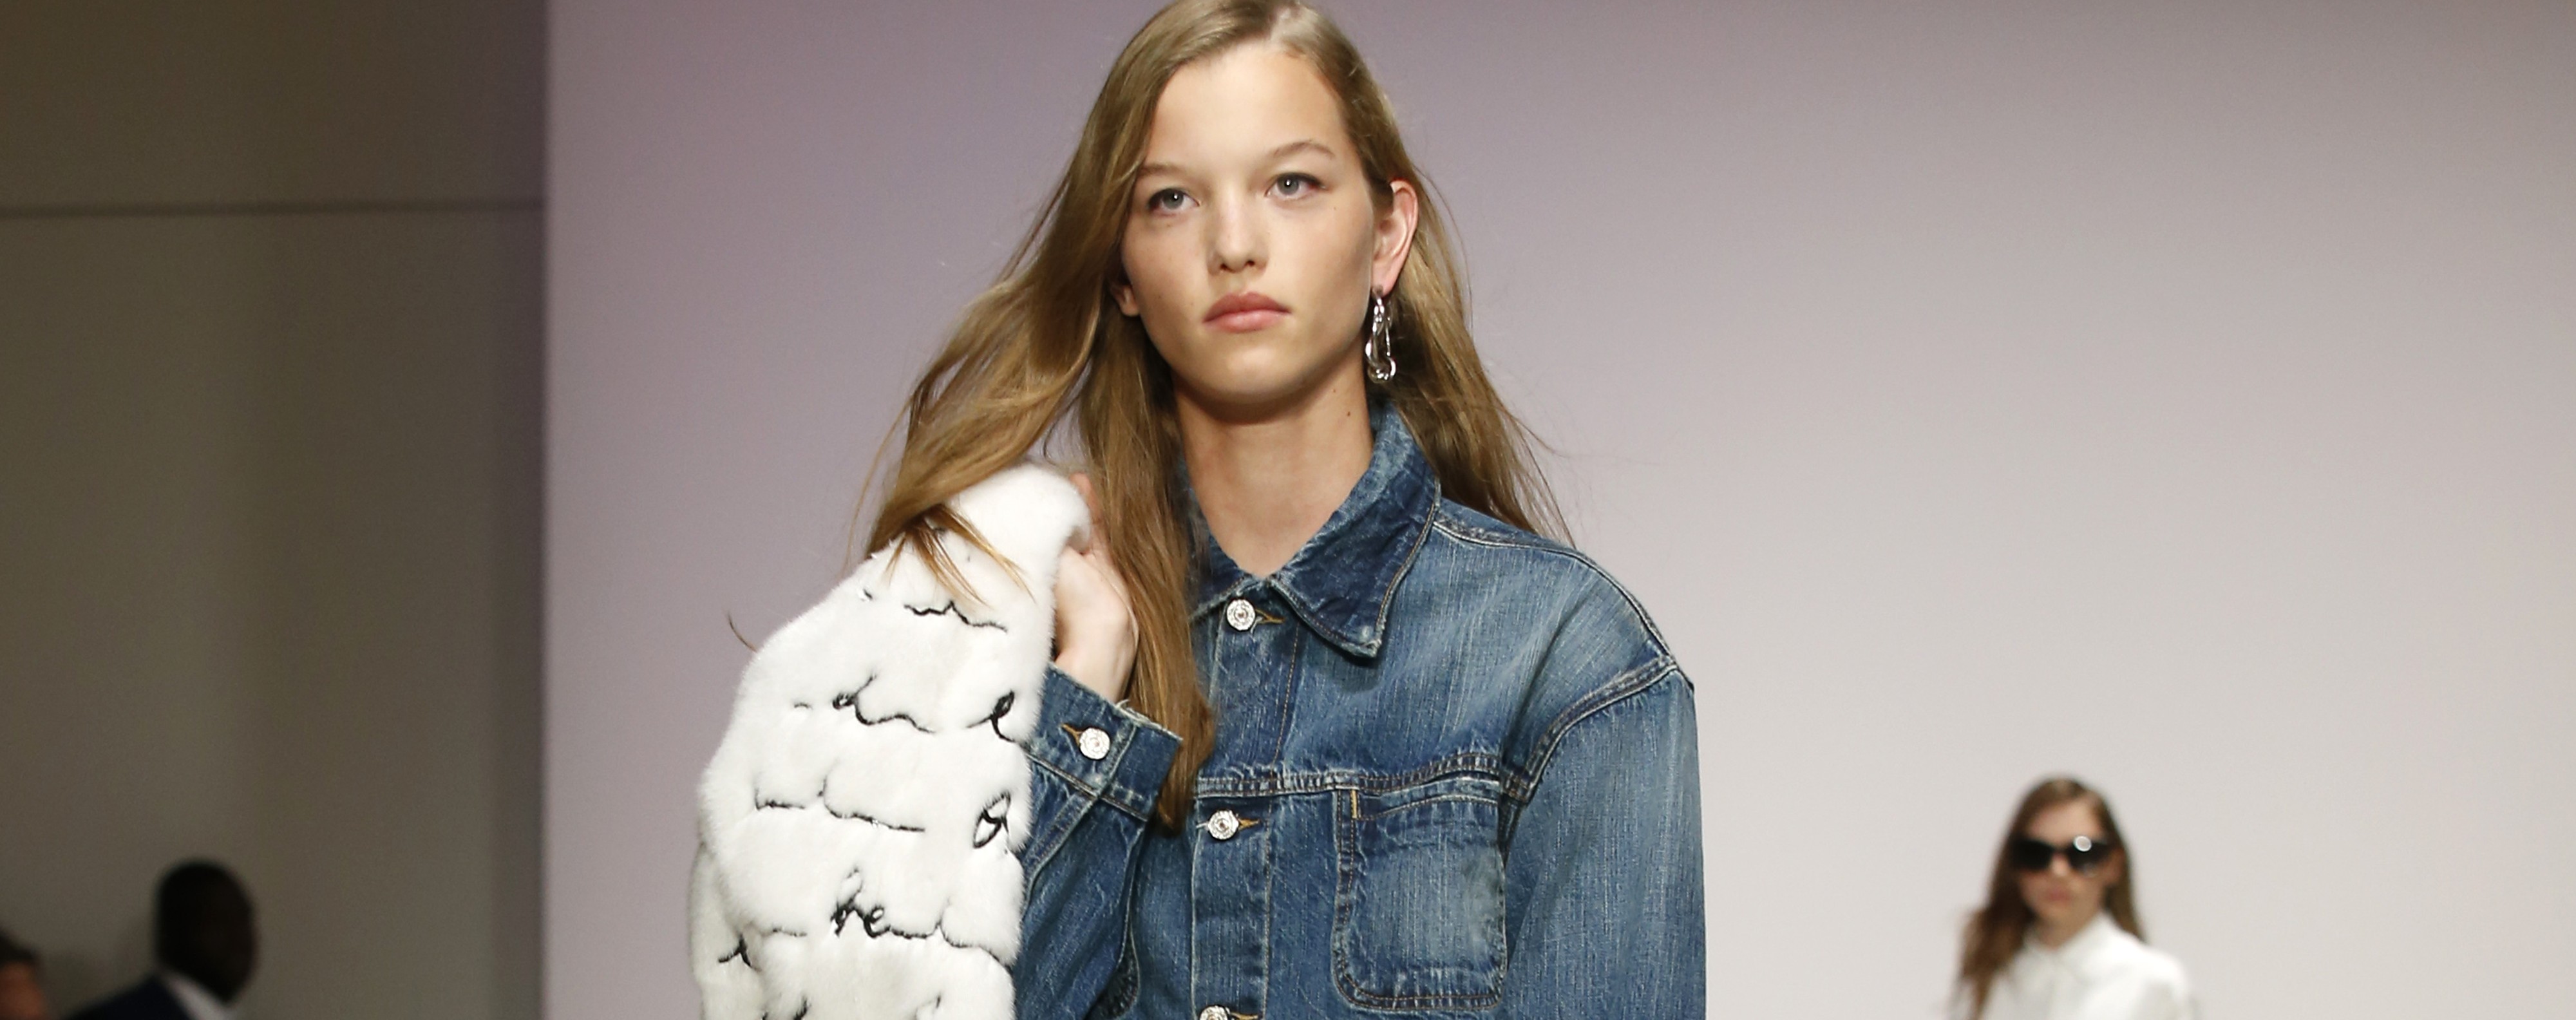 How to Style a Jean Jacket | Vogue